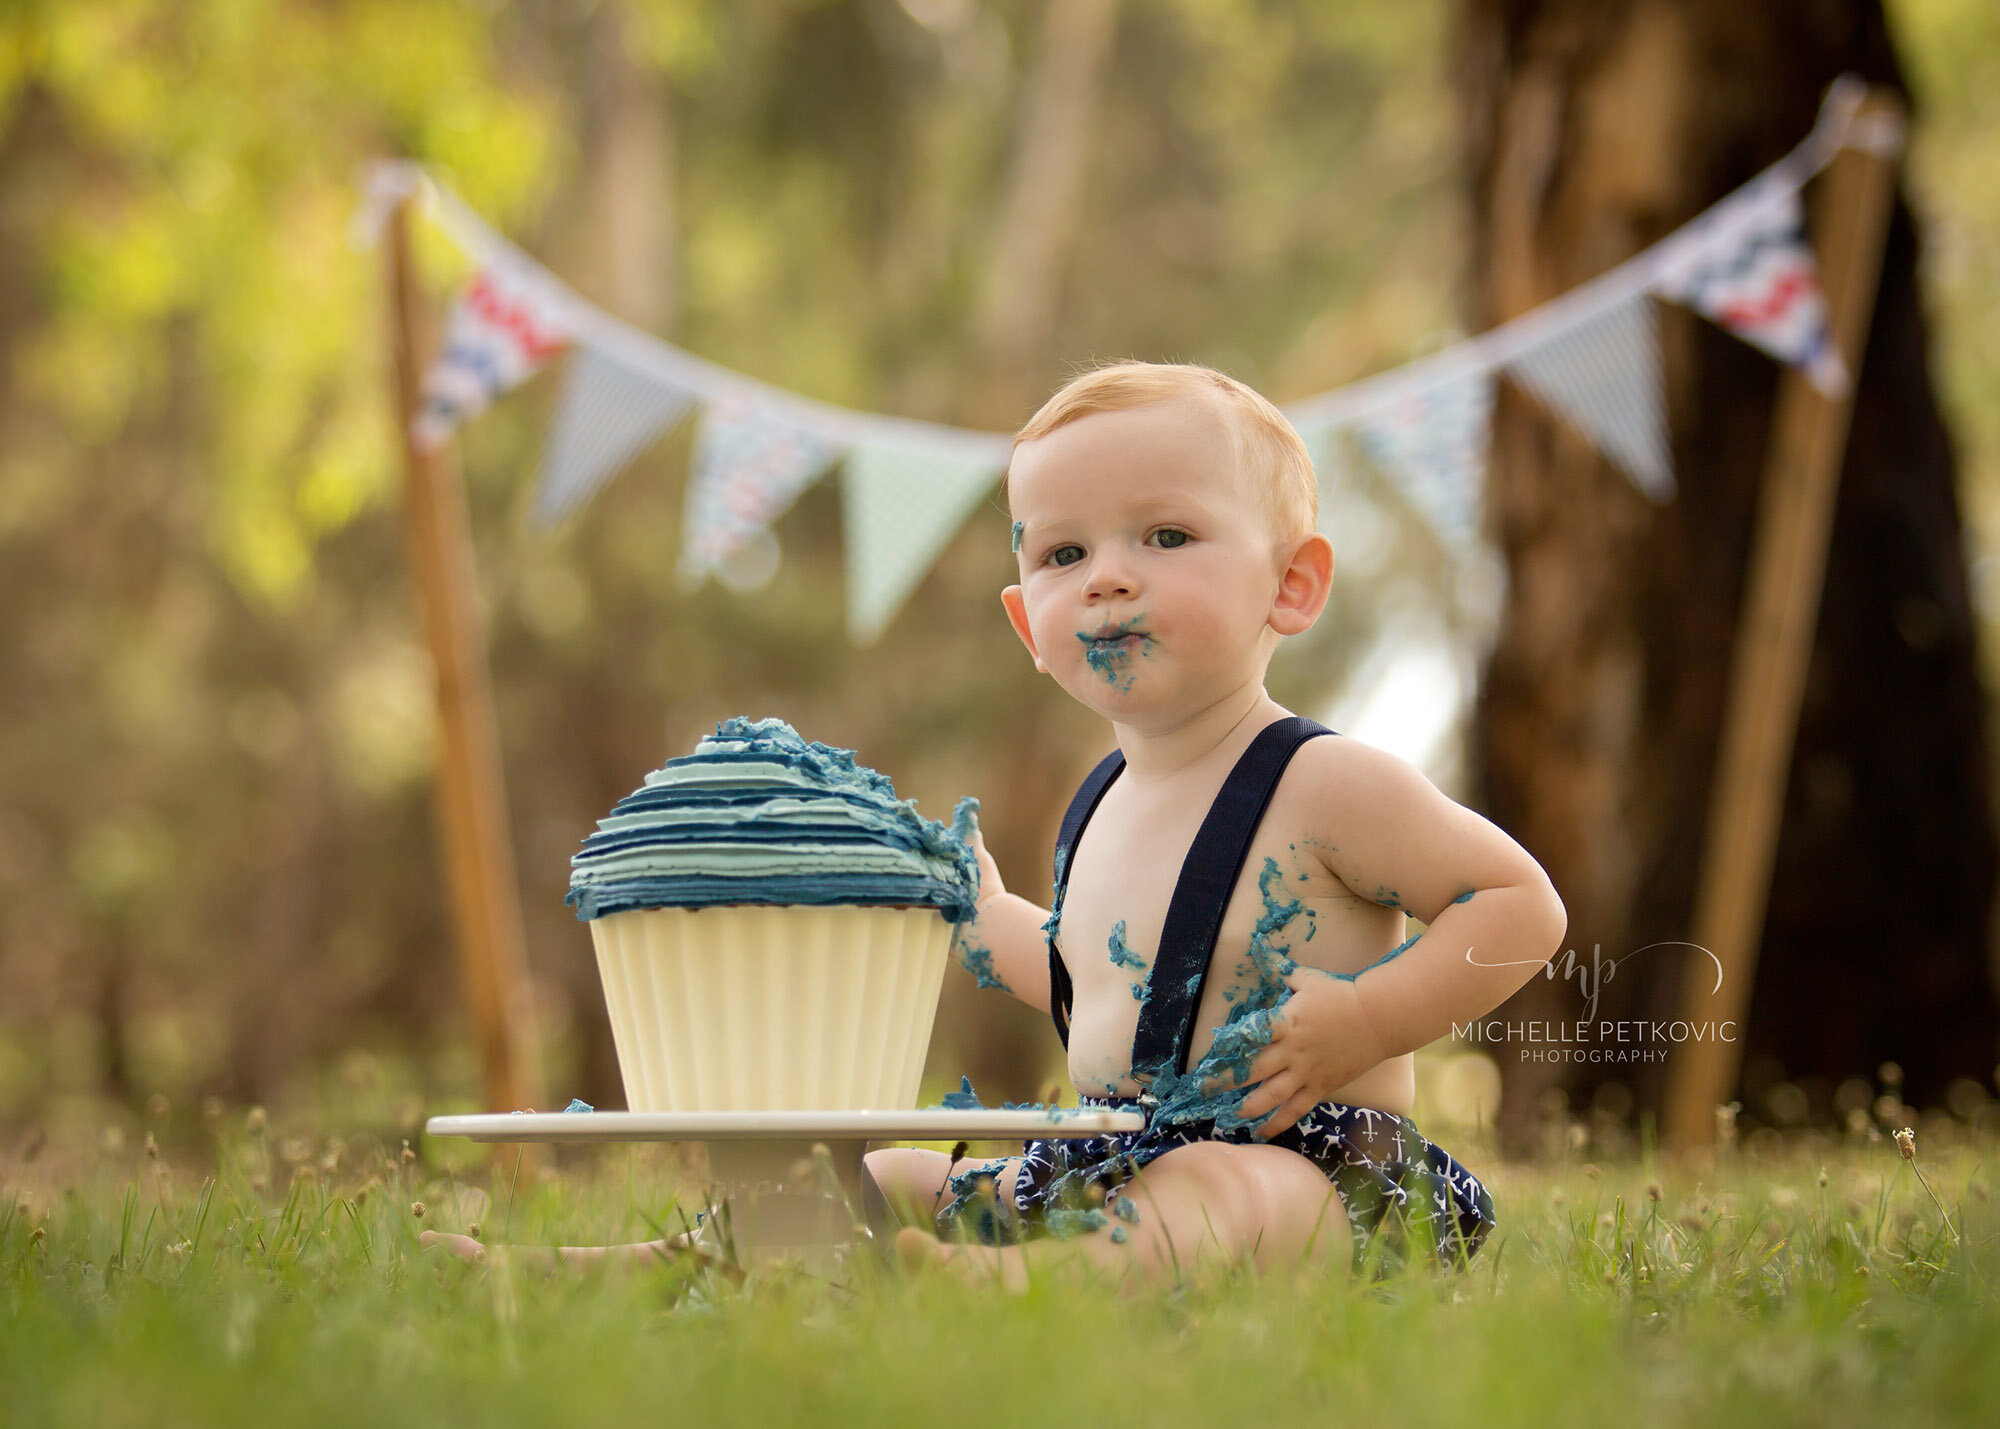 cake smash and birthday portrait photography in Paralowie and around Adelaide (Copy)